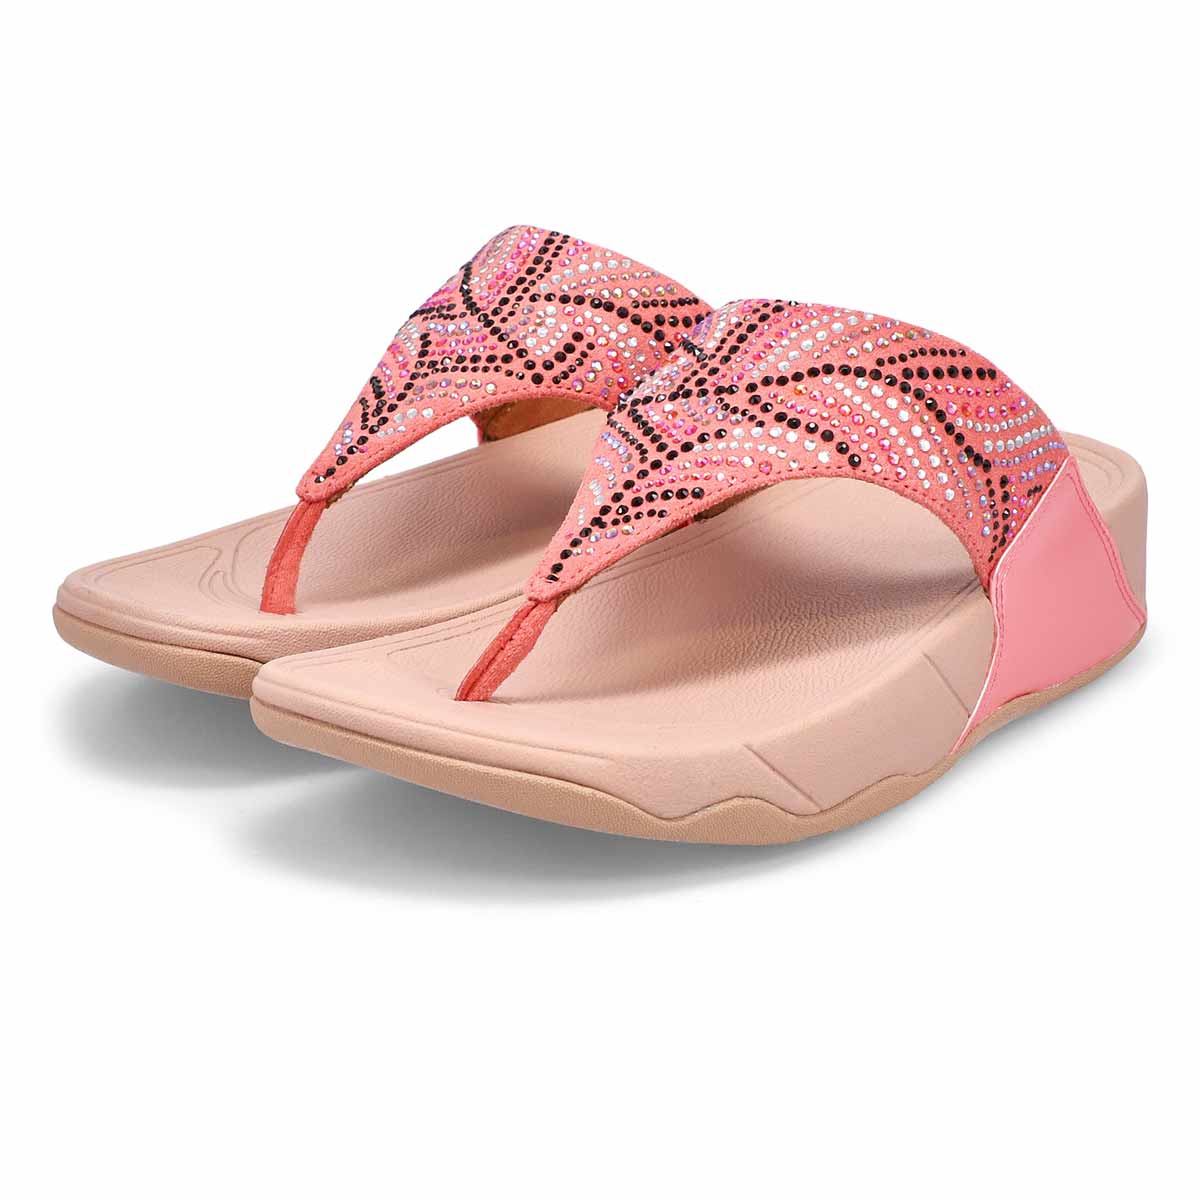 FitFlop Women's Lulu Crystal Feather Thong Sa | SoftMoc.com